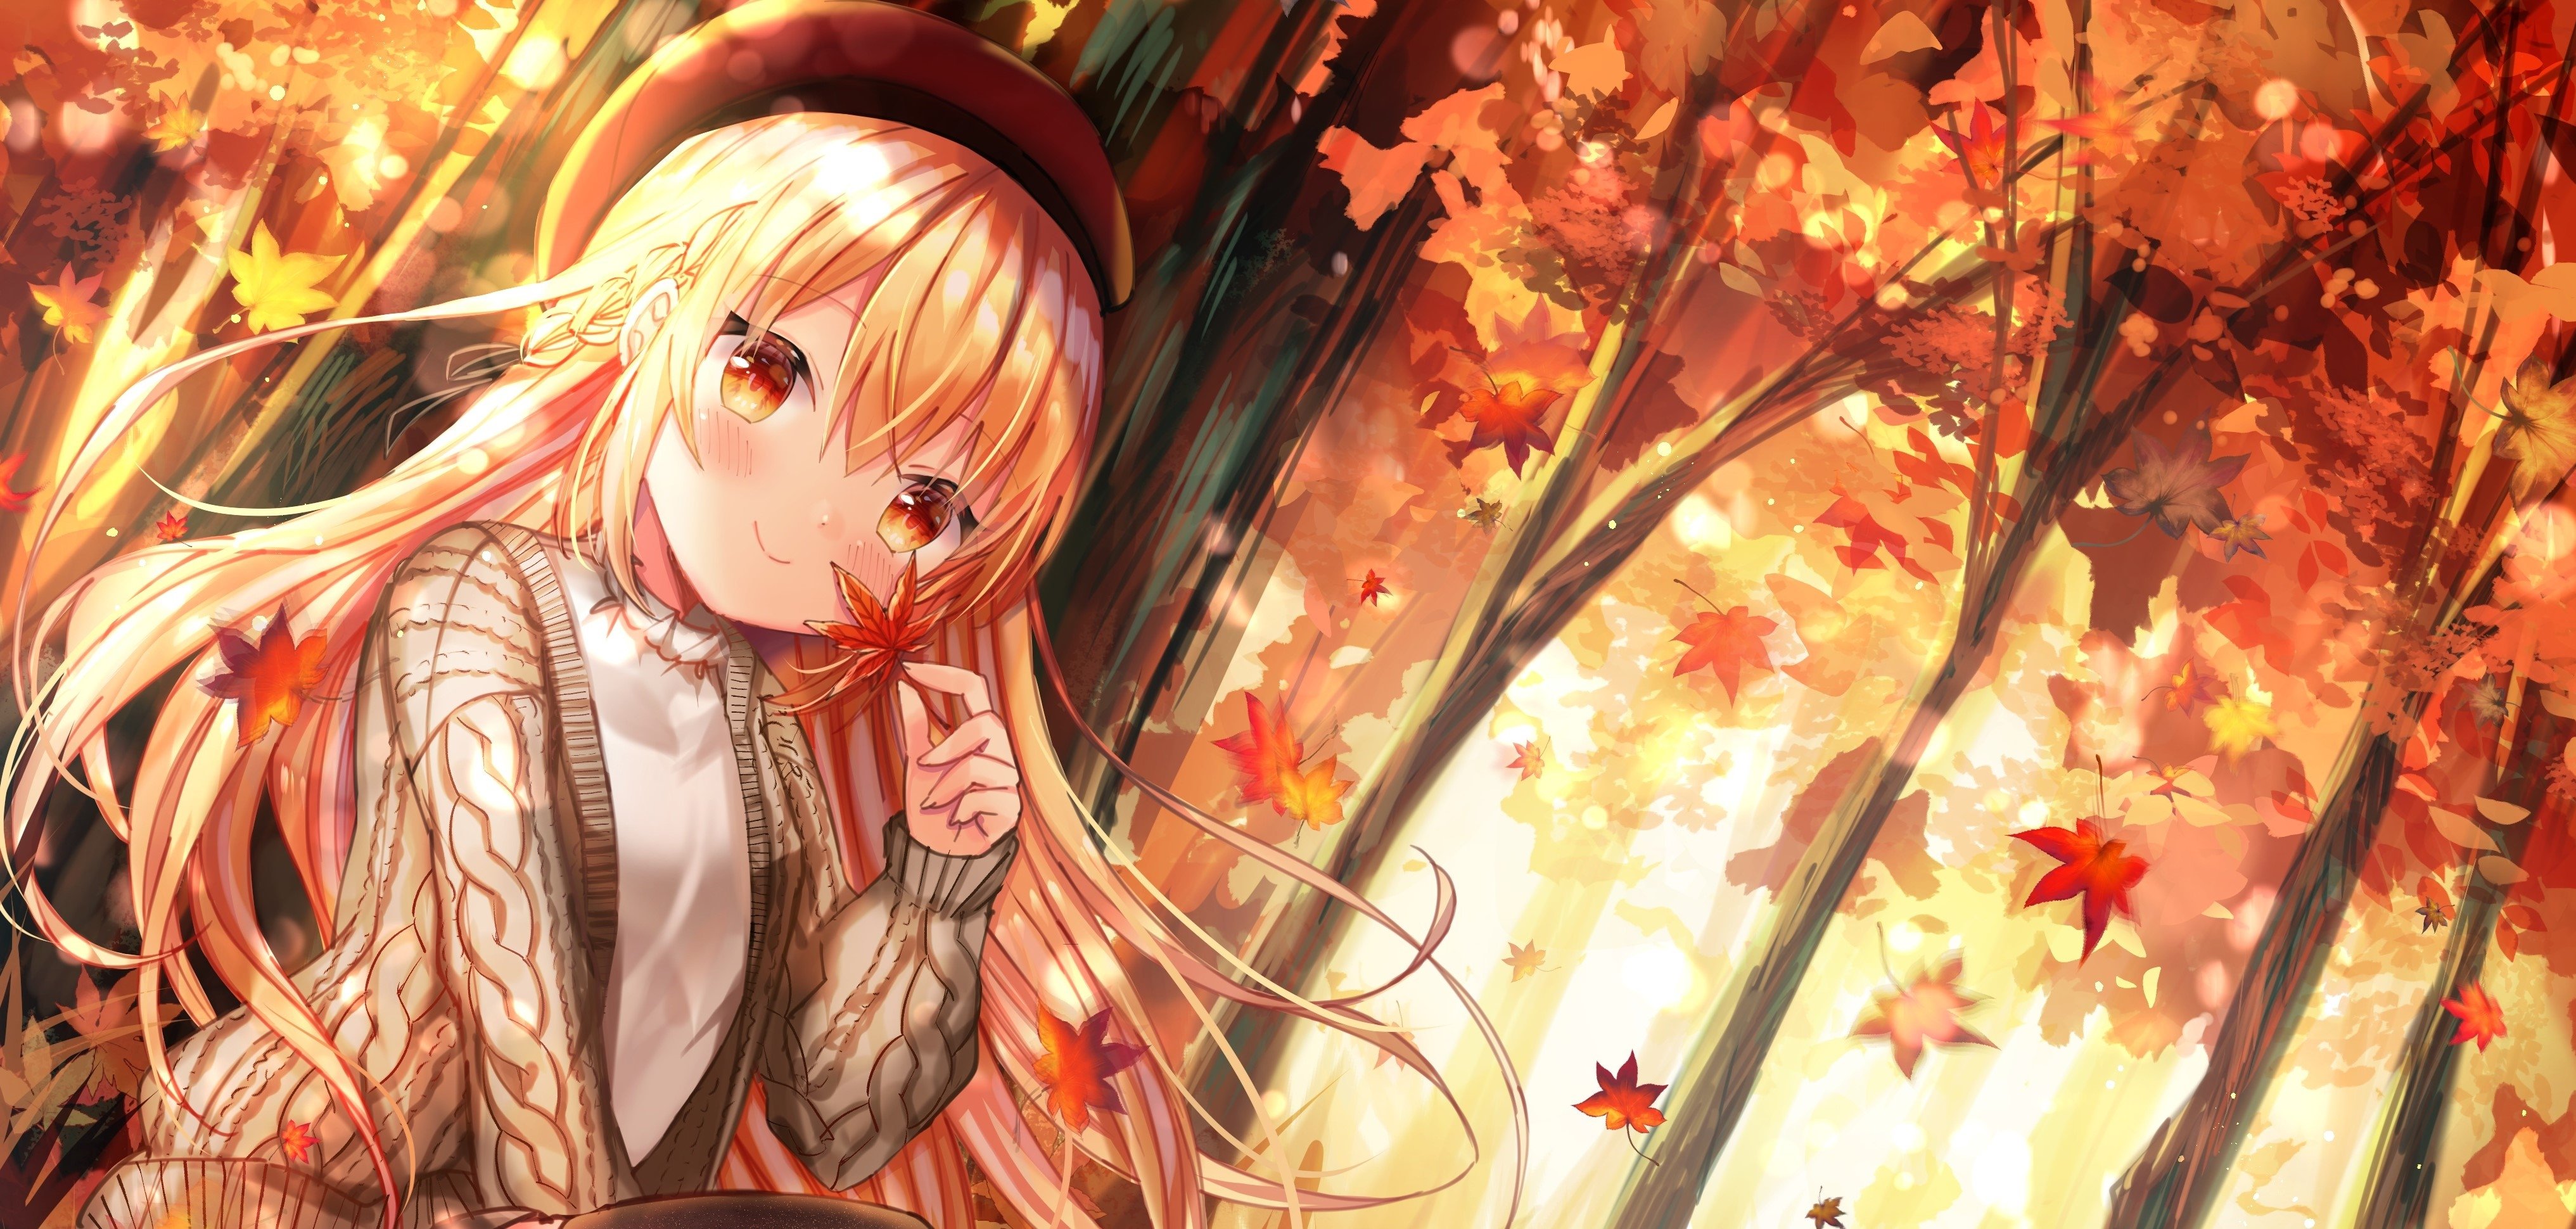 Download 2560x1440 Pretty Anime Girl, Autumn, Sitting, Trees, Fall, Smiling, Cute Wallpaper for iMac 27 inch